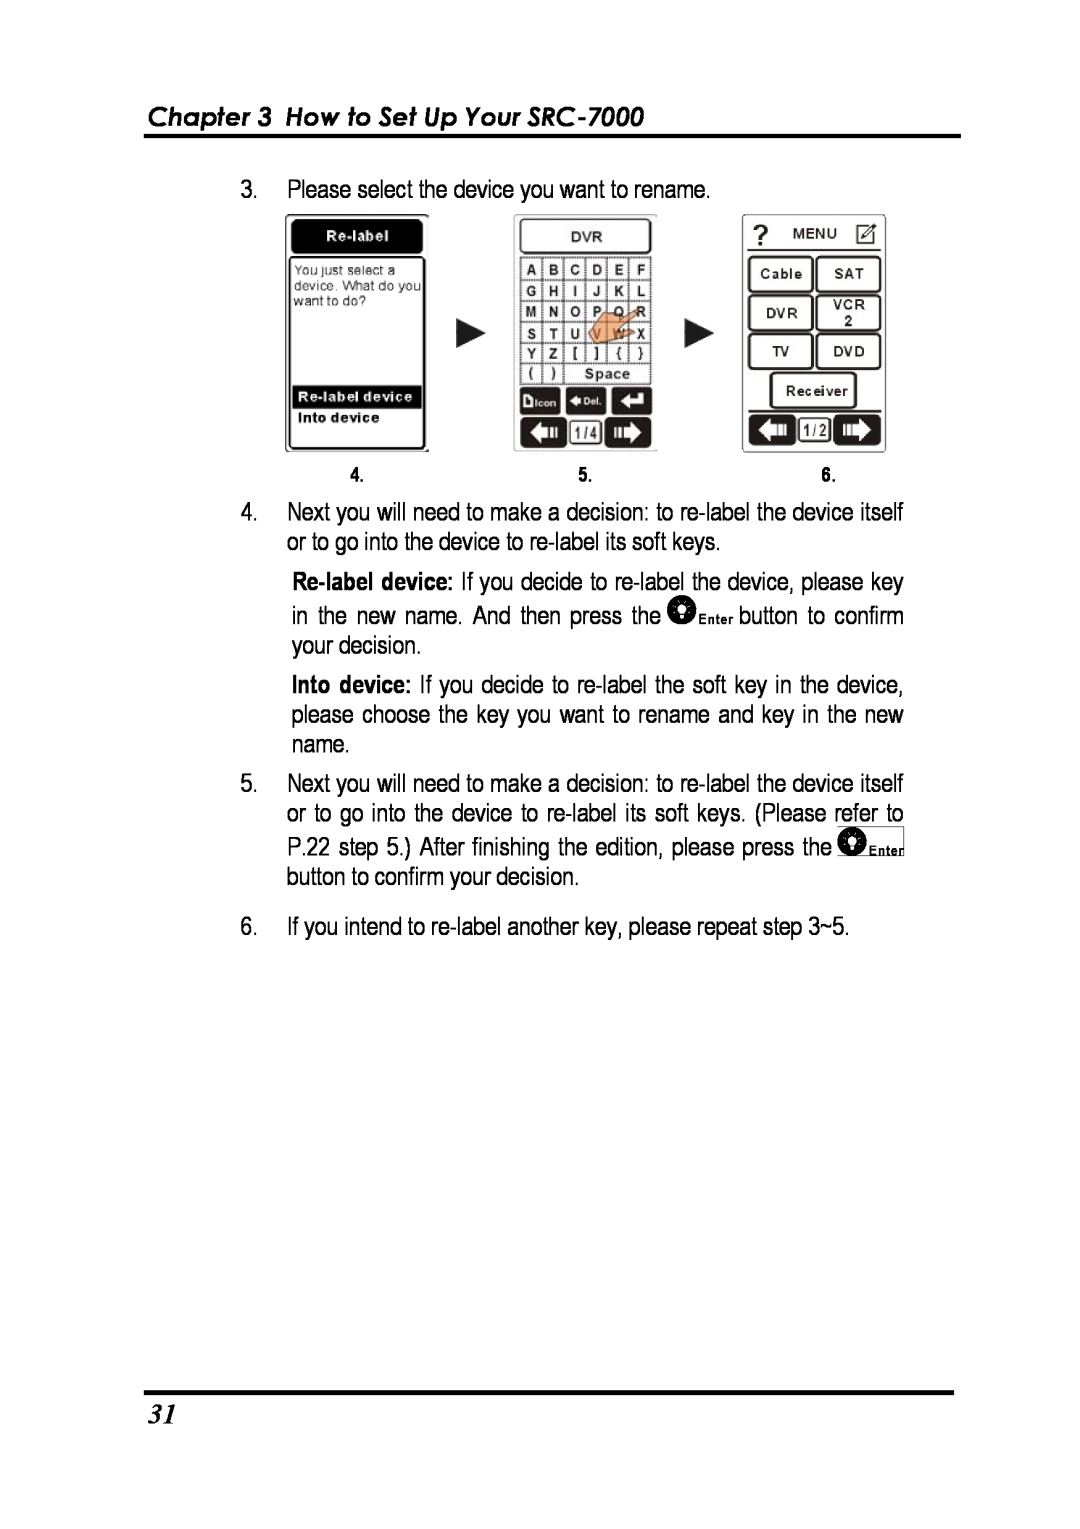 Sunwave Tech manual How to Set Up Your SRC-7000, Please select the device you want to rename 